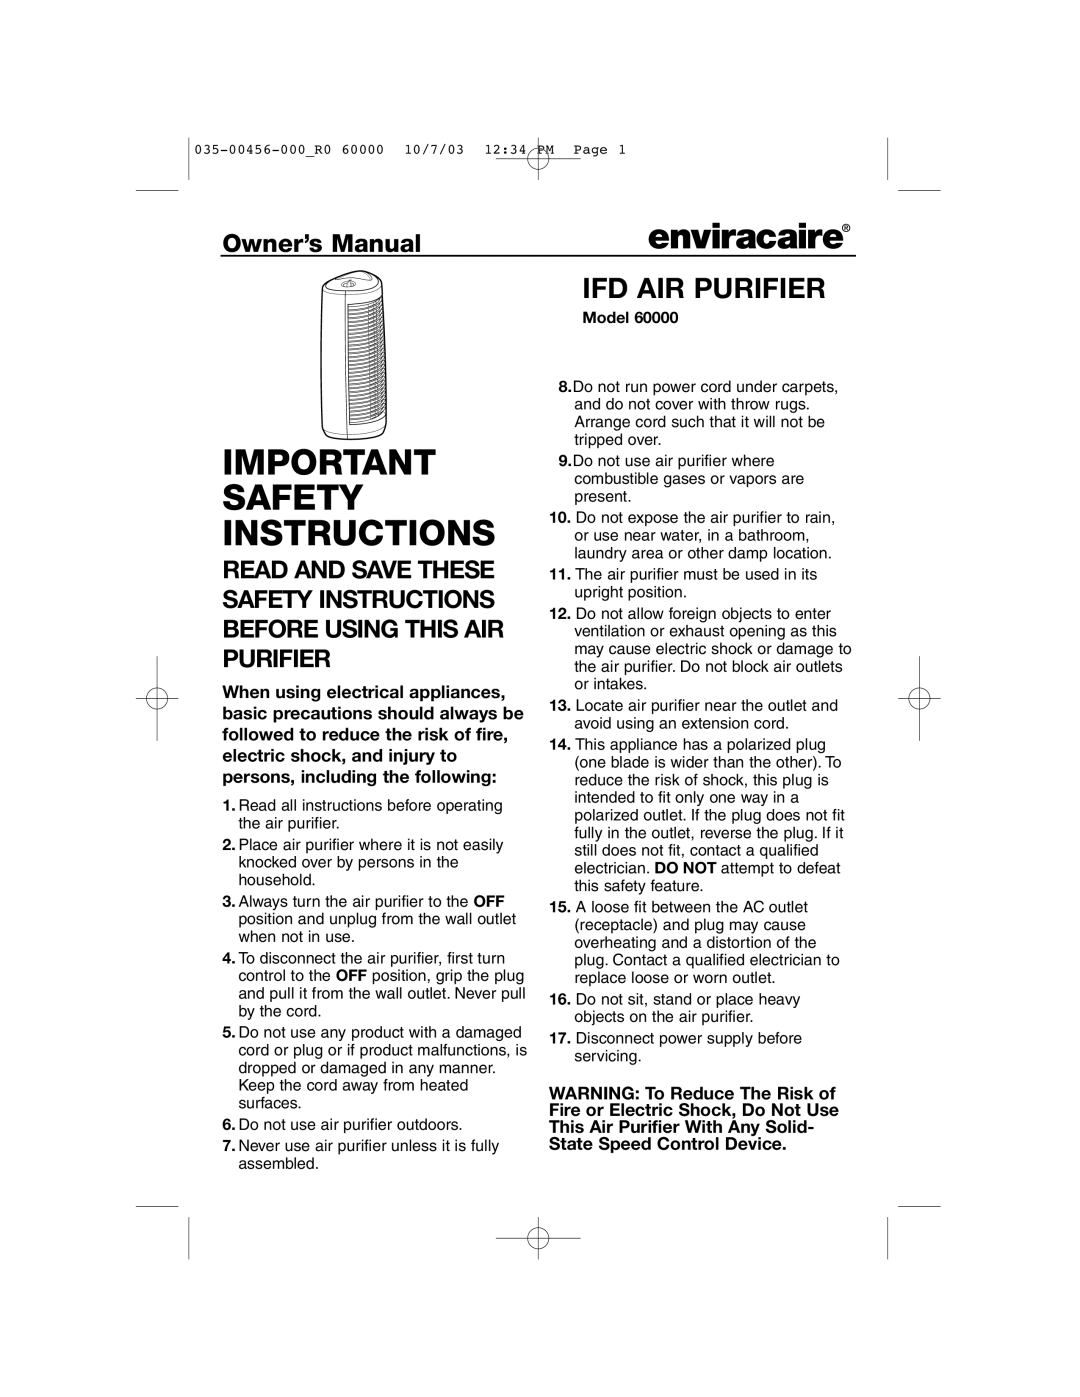 Enviracaire 60000 important safety instructions Important Safety Instructions, Ifd Air Purifier 